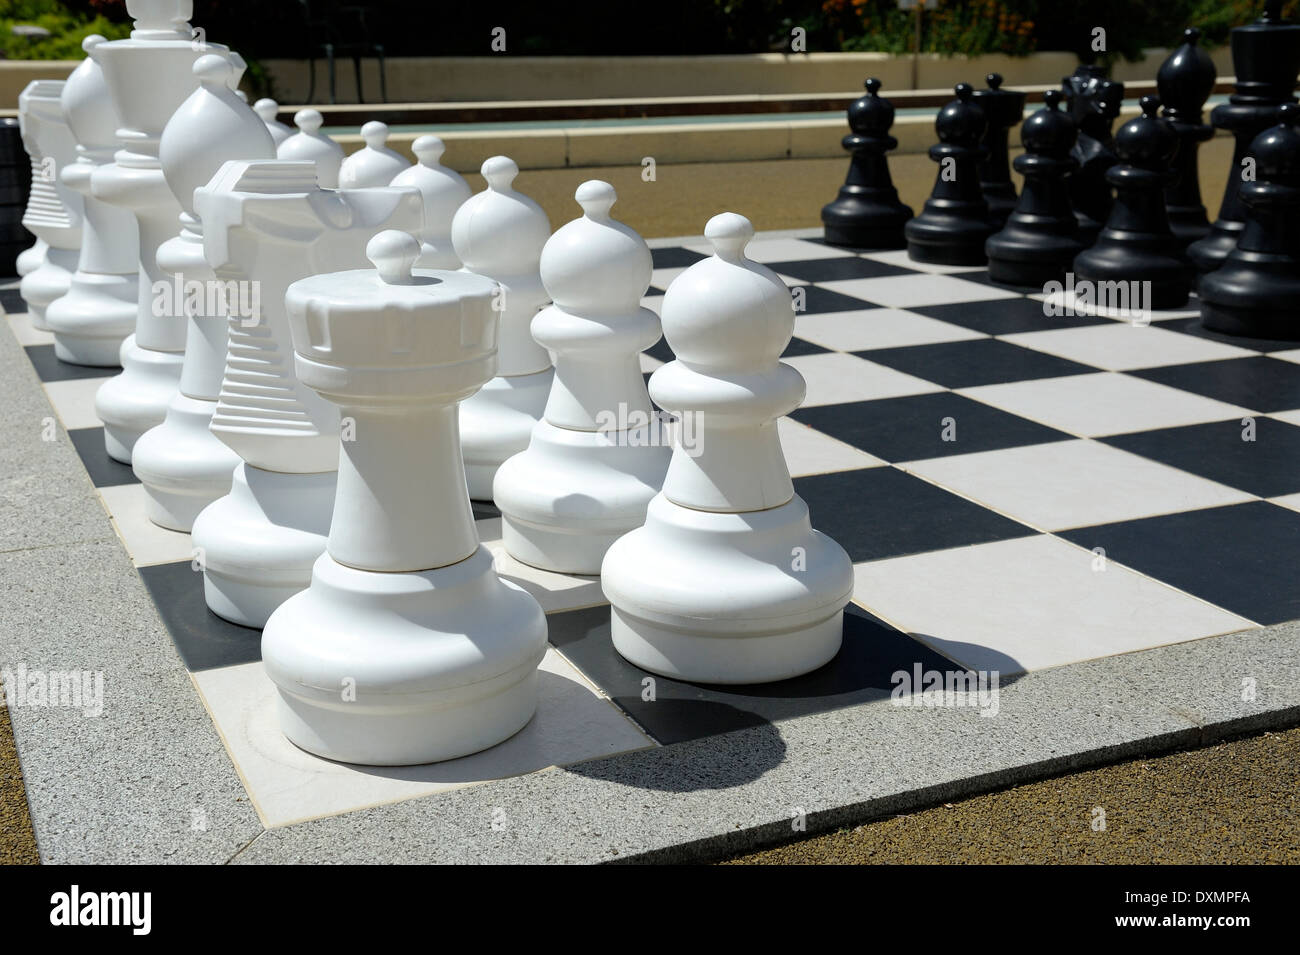 Giant chess set in a hotel adult play area Madeira Portugal Stock Photo -  Alamy